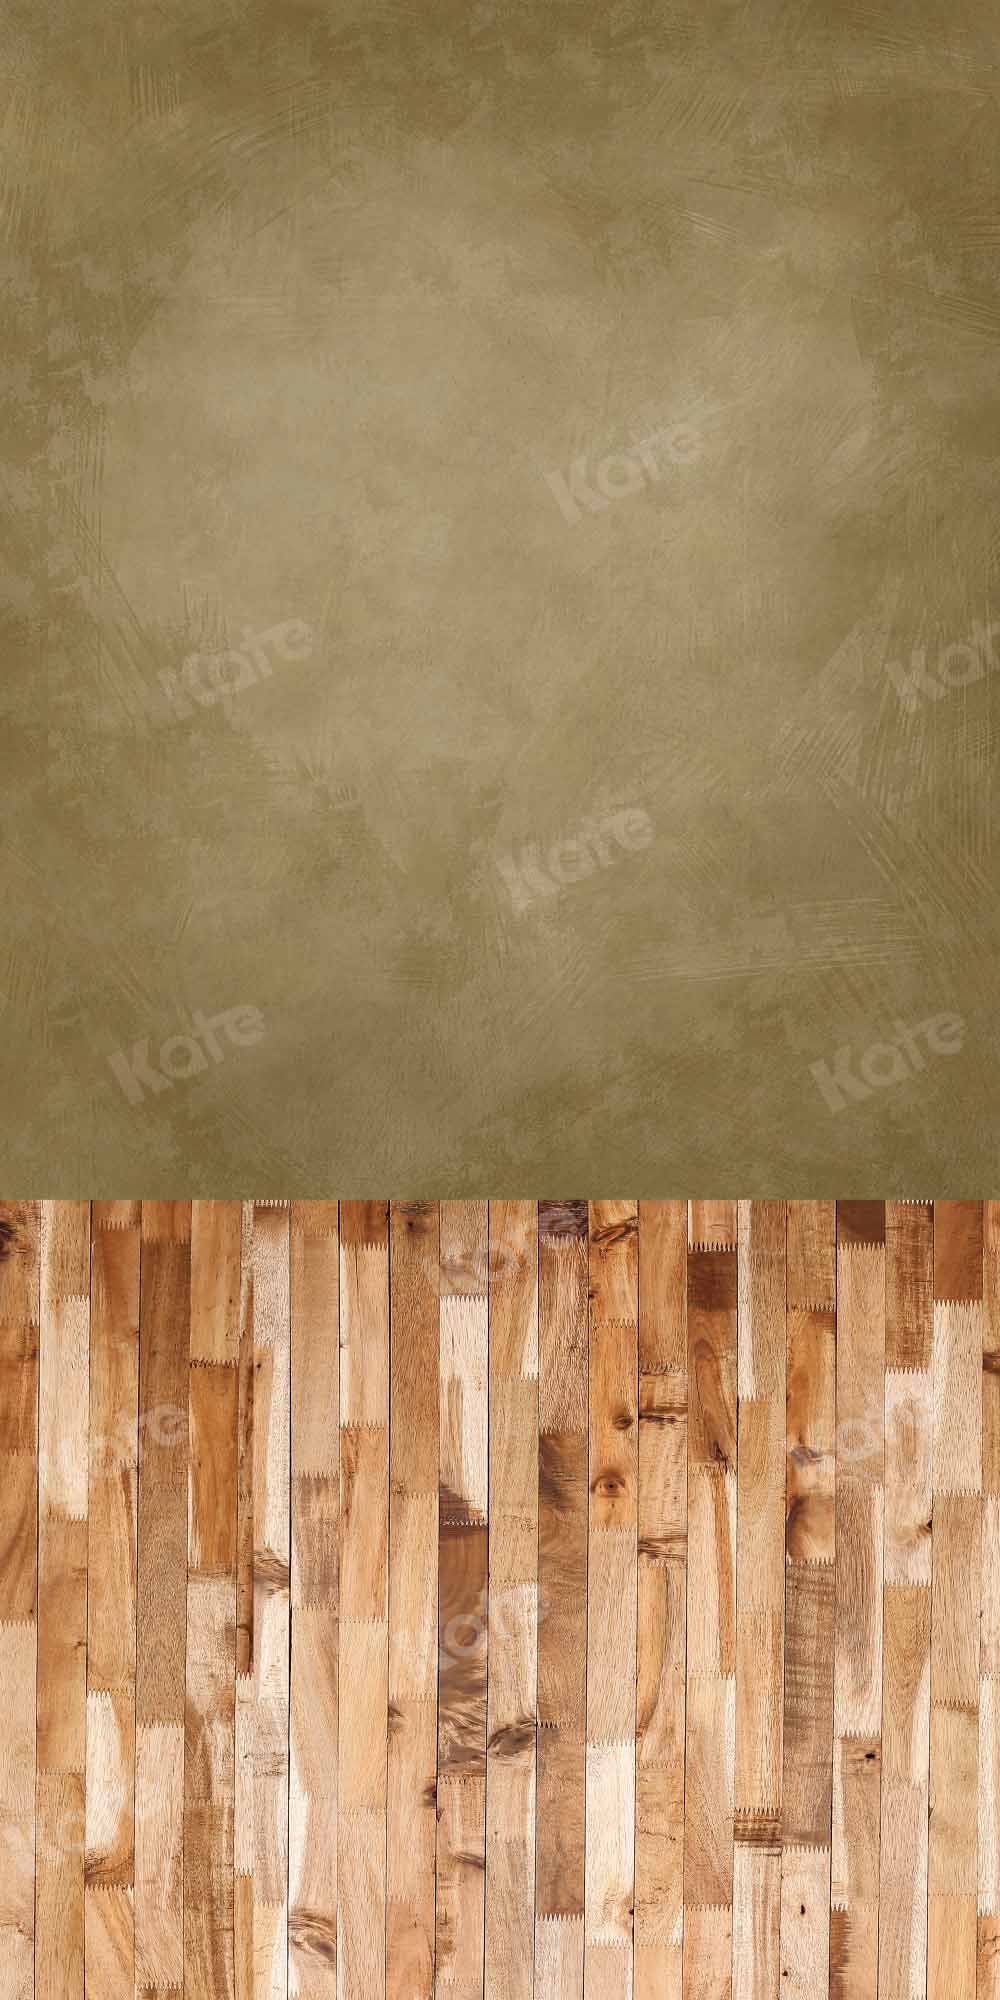 Kate Sweep Abstract Backdrop Wooden Board Stitching Designed by Chain Photographer